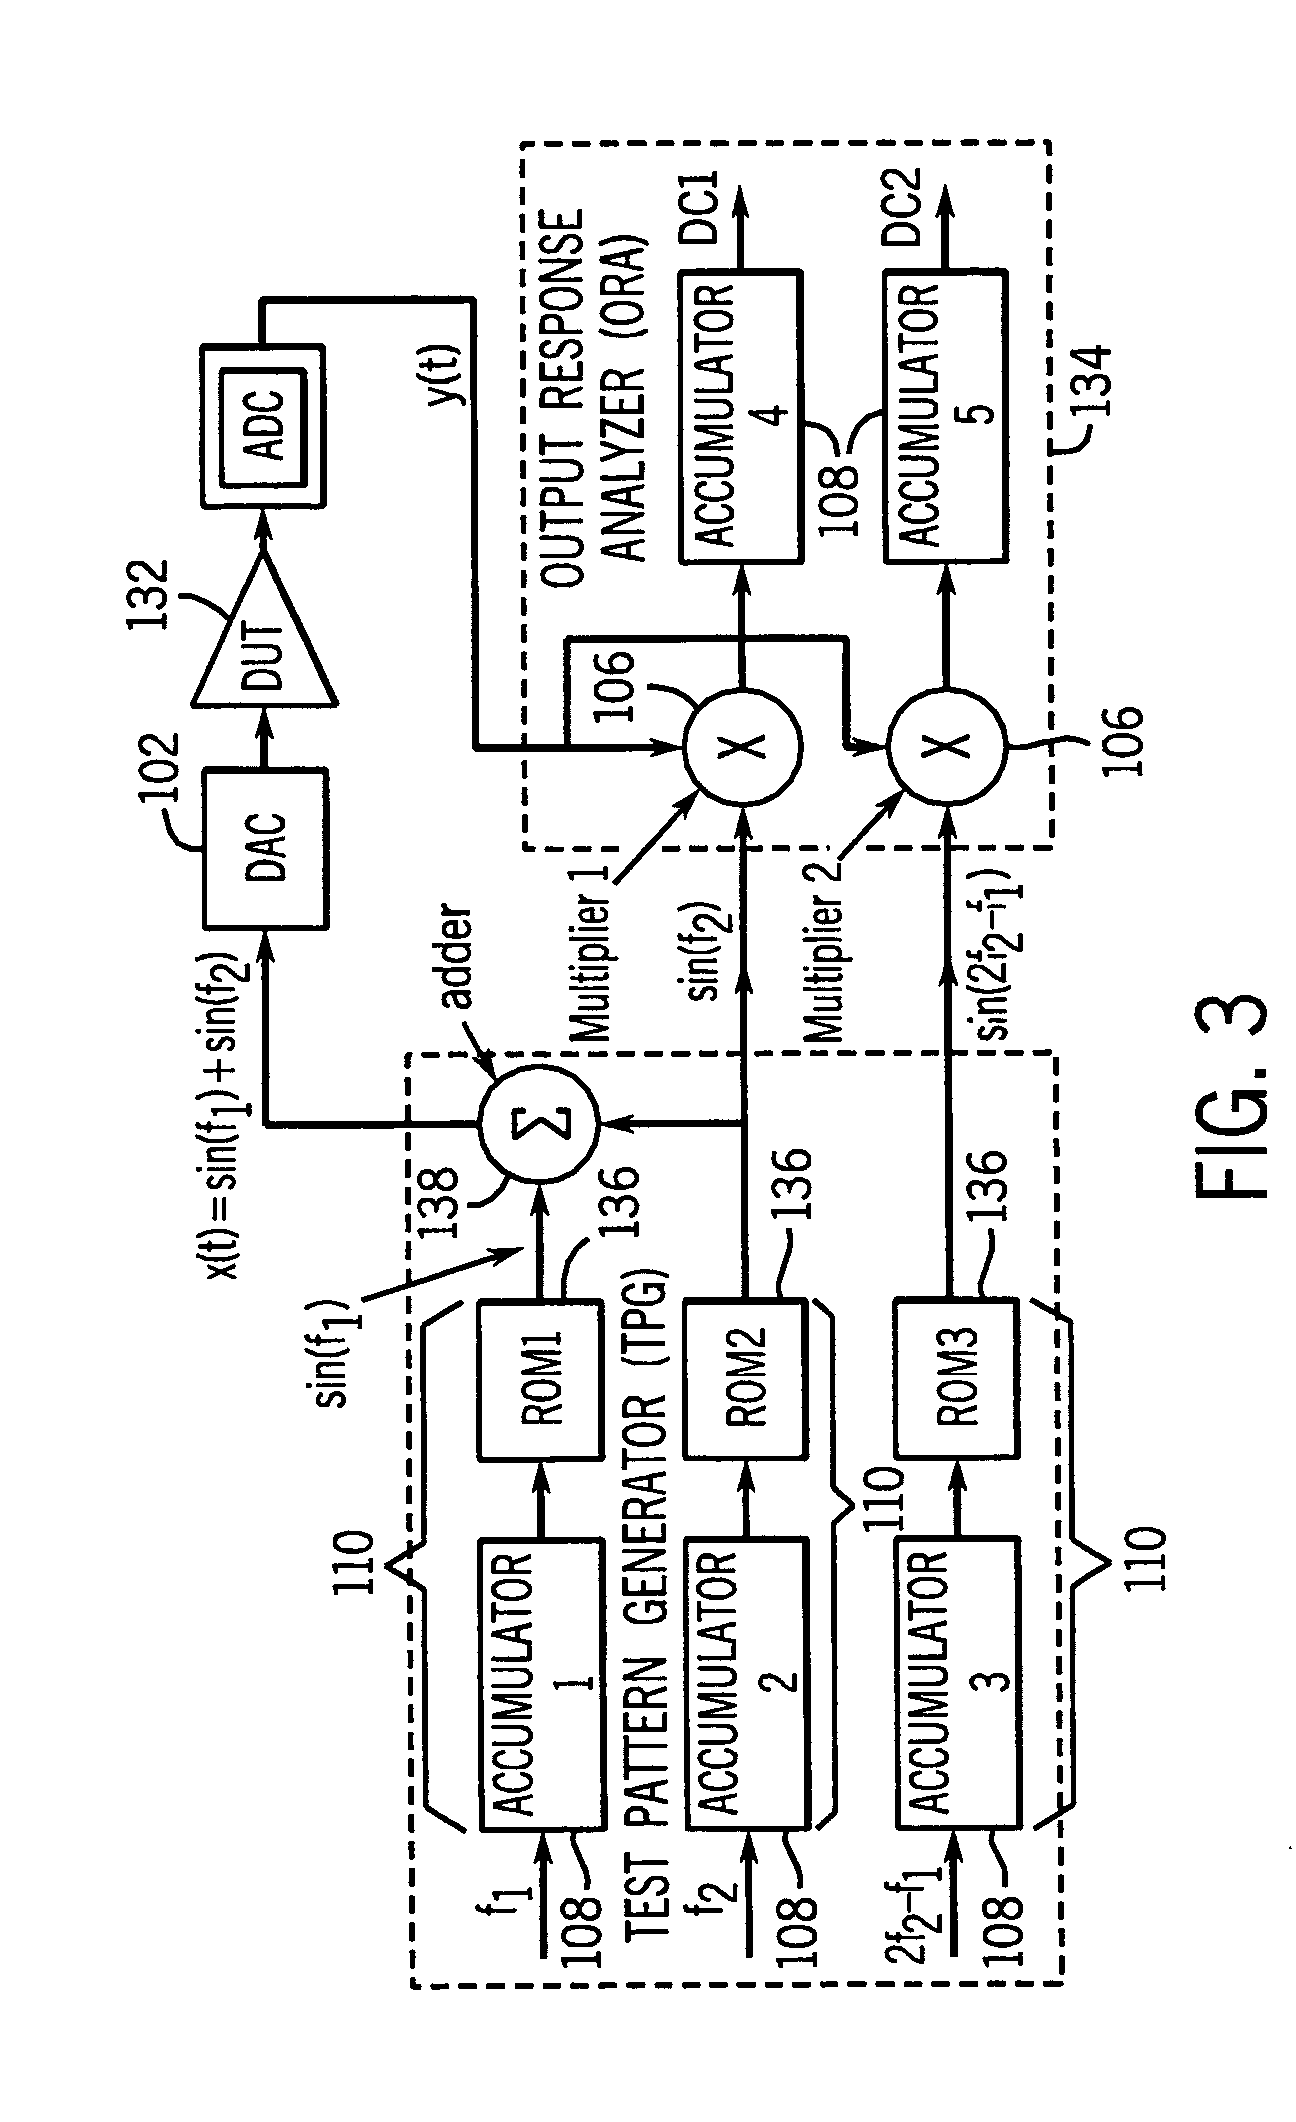 Automatic analog test and compensation with built-in pattern generator and analyzer